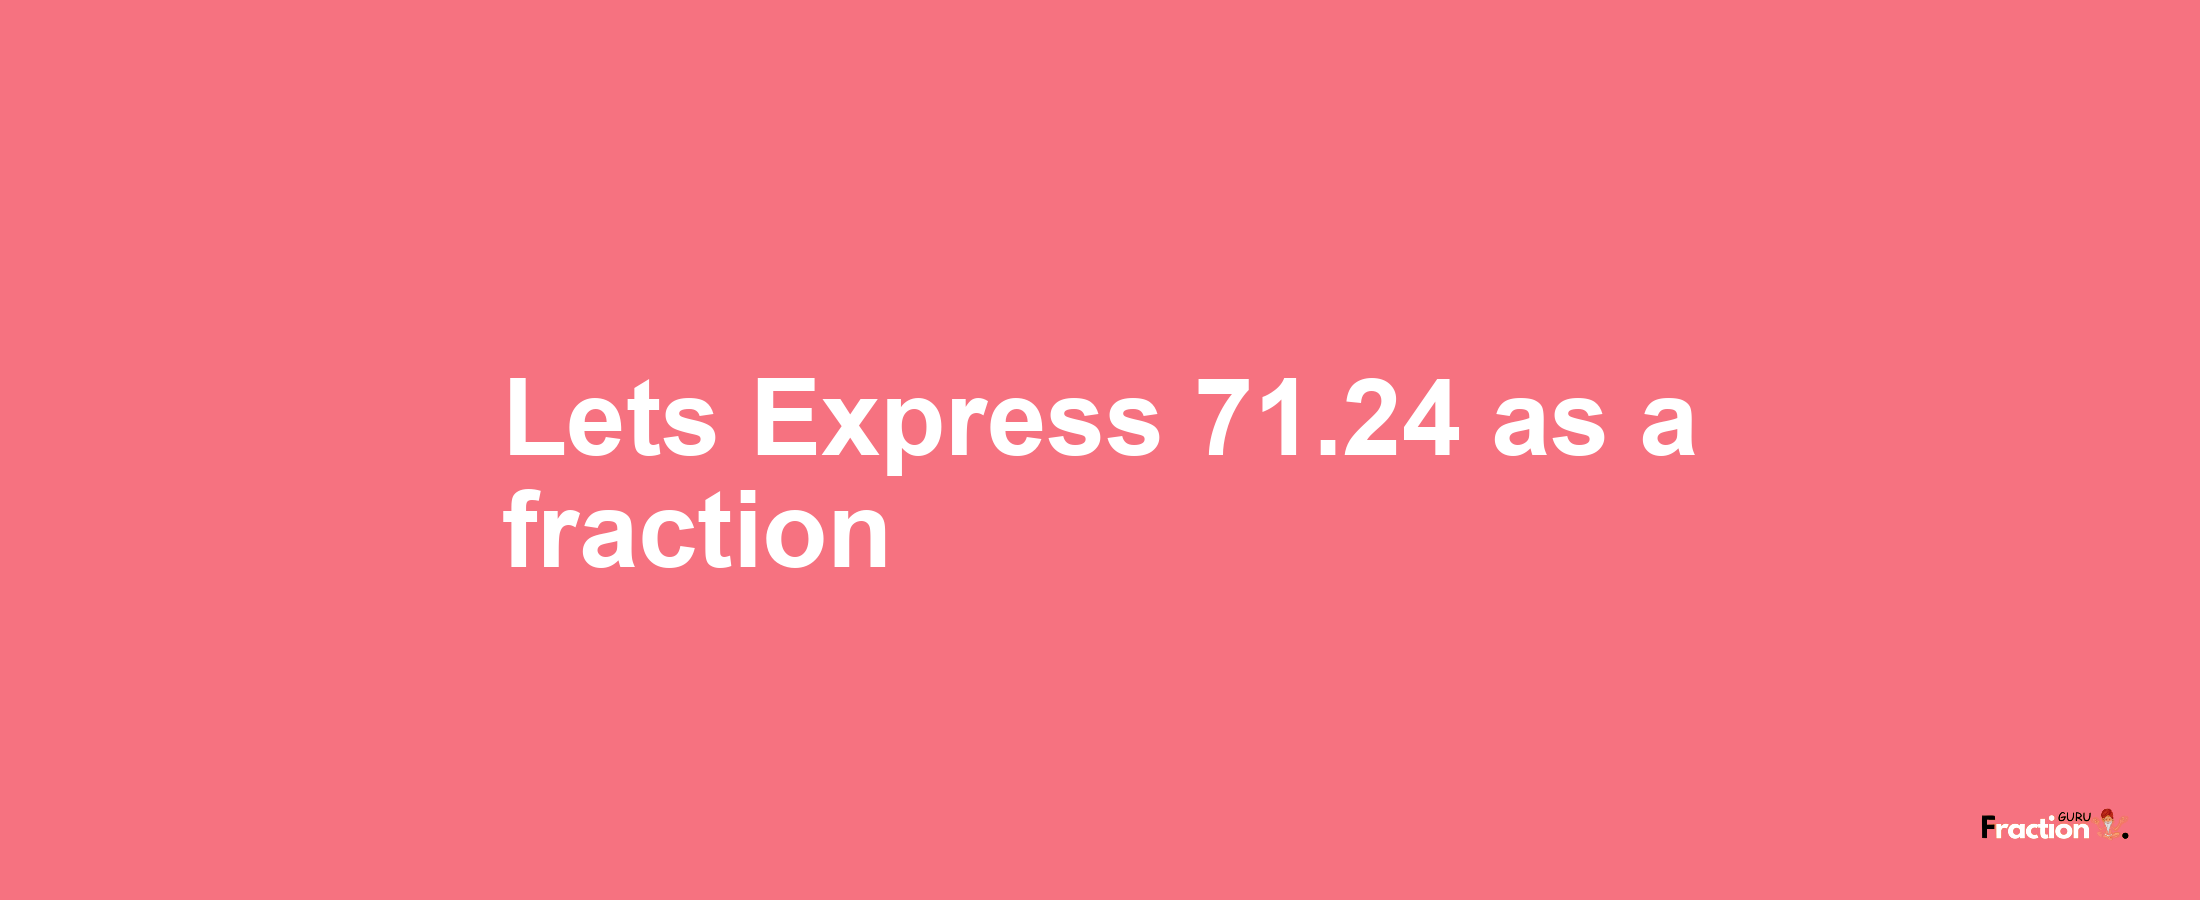 Lets Express 71.24 as afraction